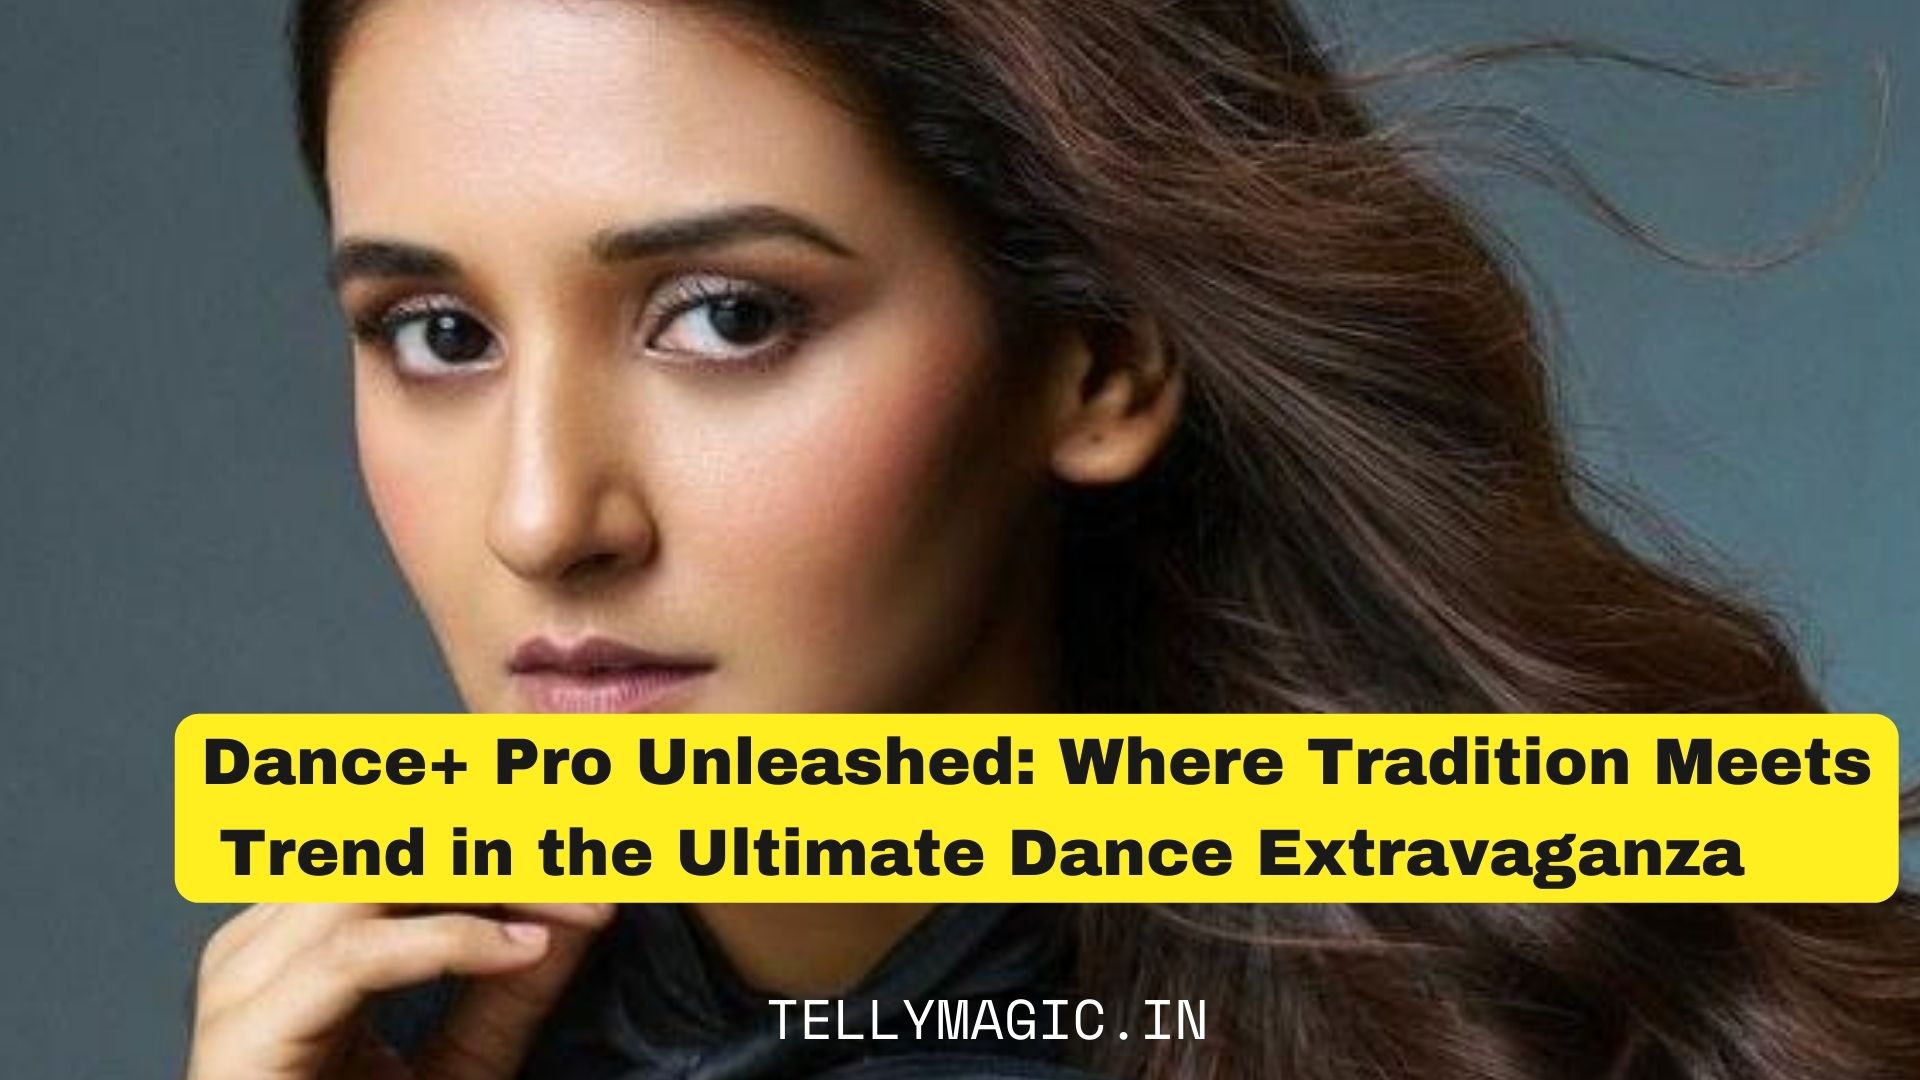 Dance+ Pro Unleashed: Where Tradition Meets Trend in the Ultimate Dance Extravaganza